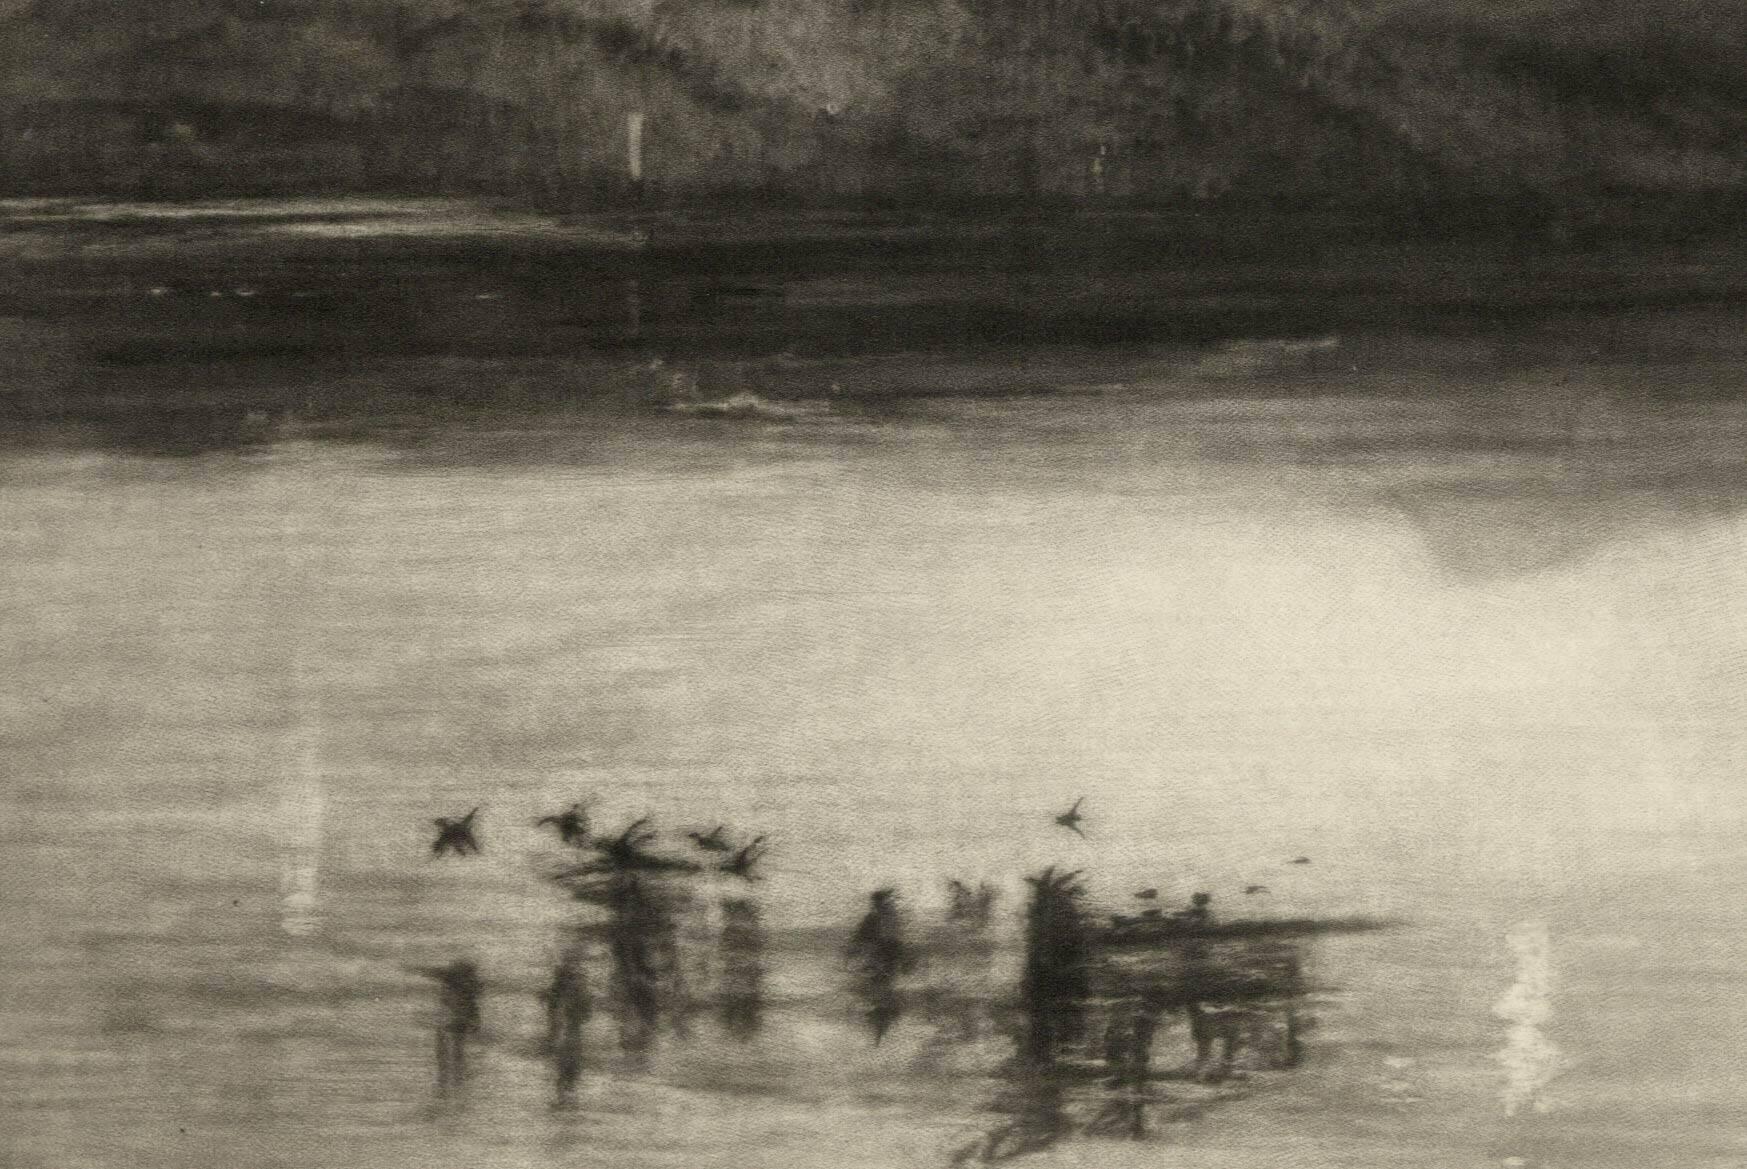 Mount Rigi at Dawn (The Alps in Central Switzerland. Boat and flock of birds) - Modern Print by Sir Frank Short